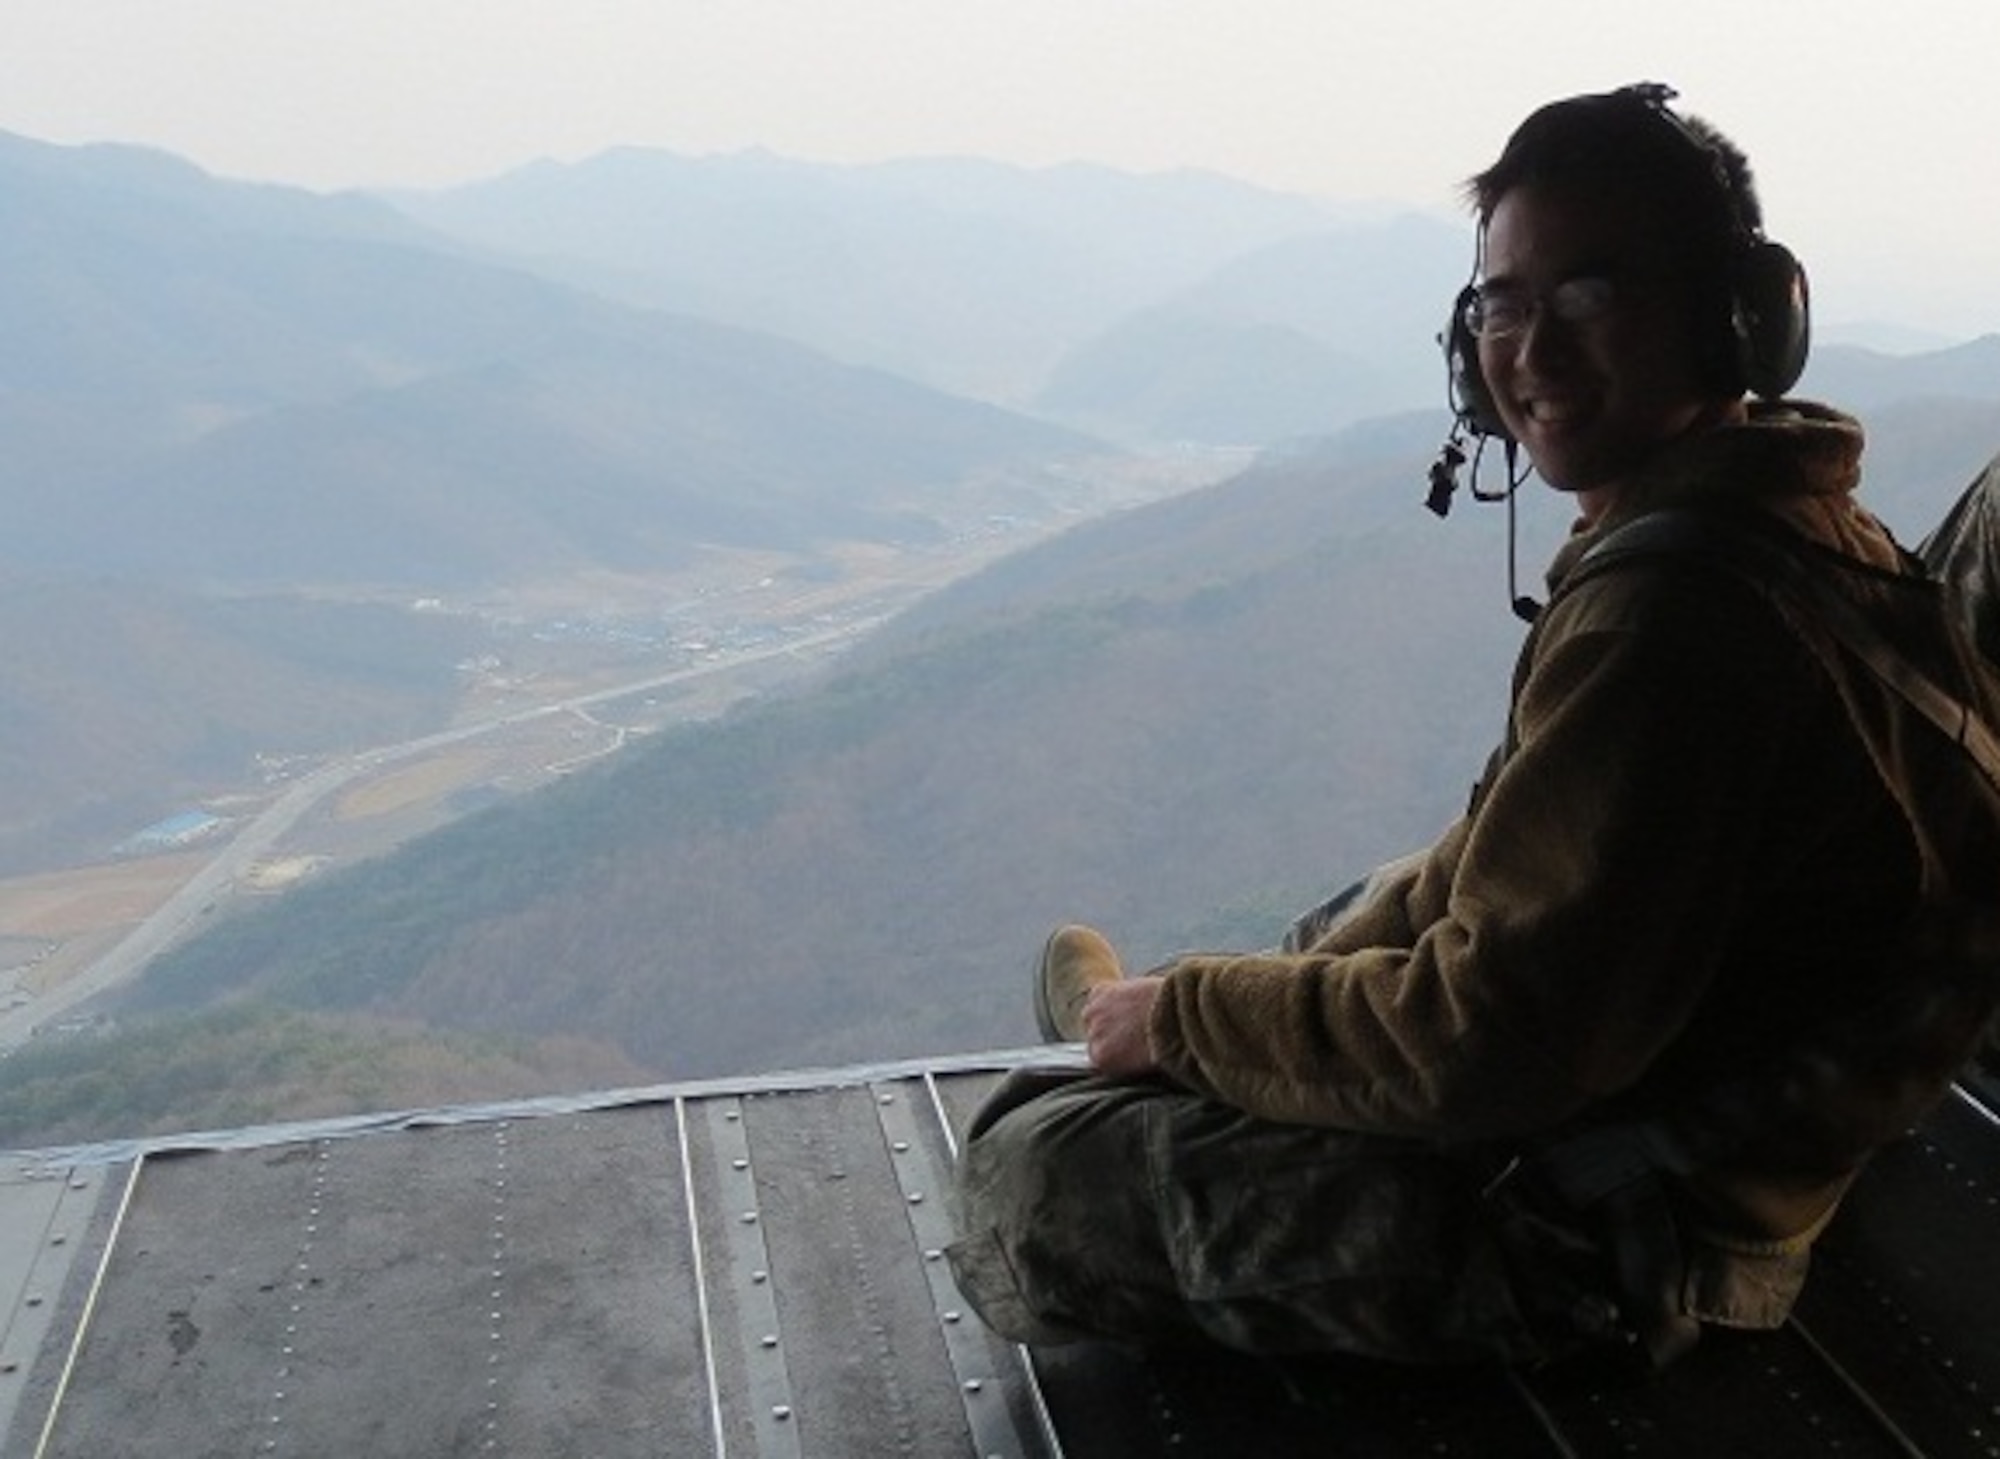 Senior Airman Seung-Jae Oh, U.S. Air Force Special Operations School cultural advisor, participates in an airborne training exercise in support of Balance Knife in the Republic of Korea, April 2013. (courtesy photo)